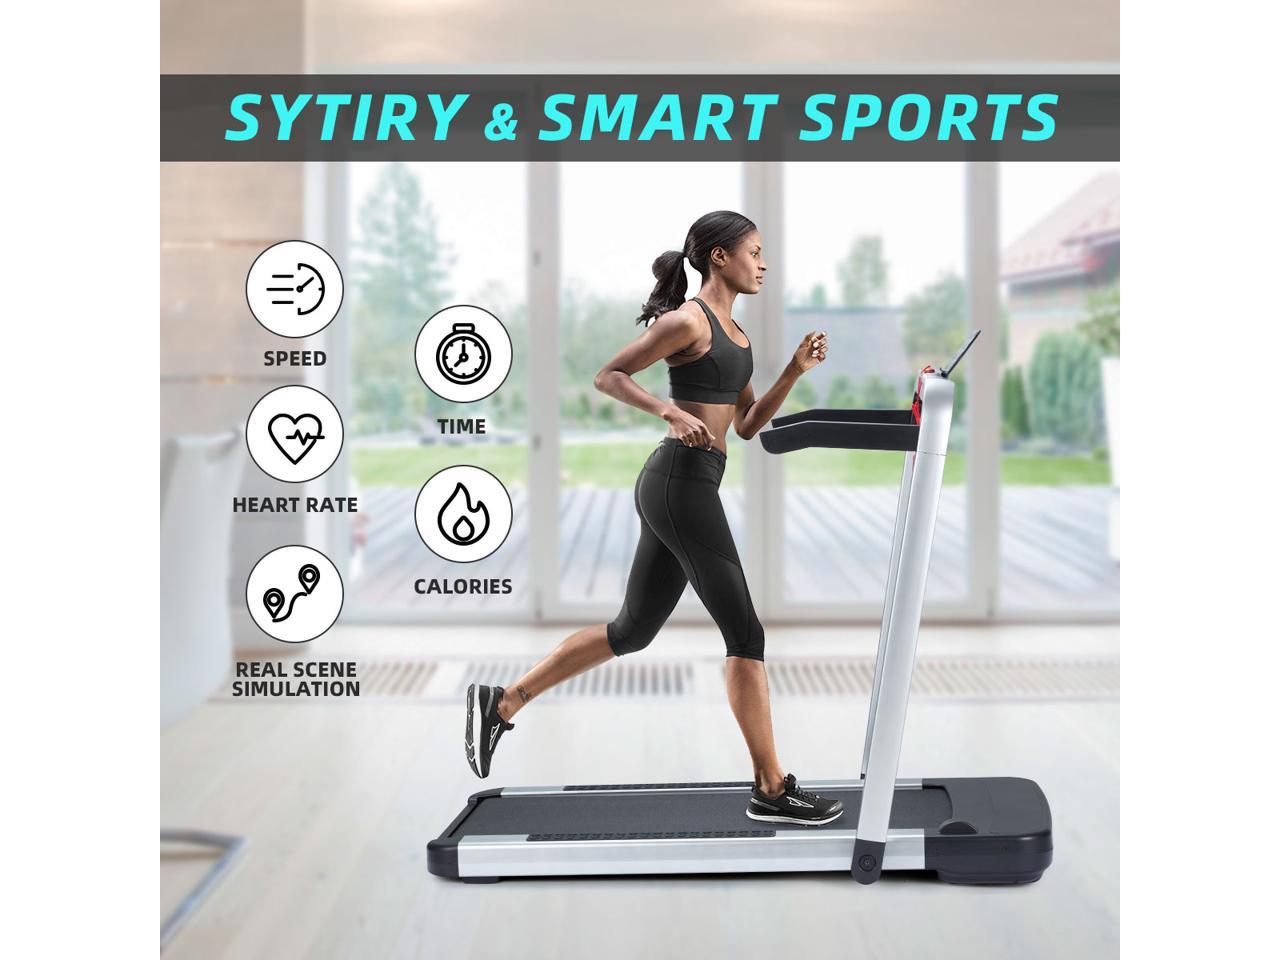 3D Vibration Platform Exercise Machine 1.0HP Full Body Fitness With Arm Straps 